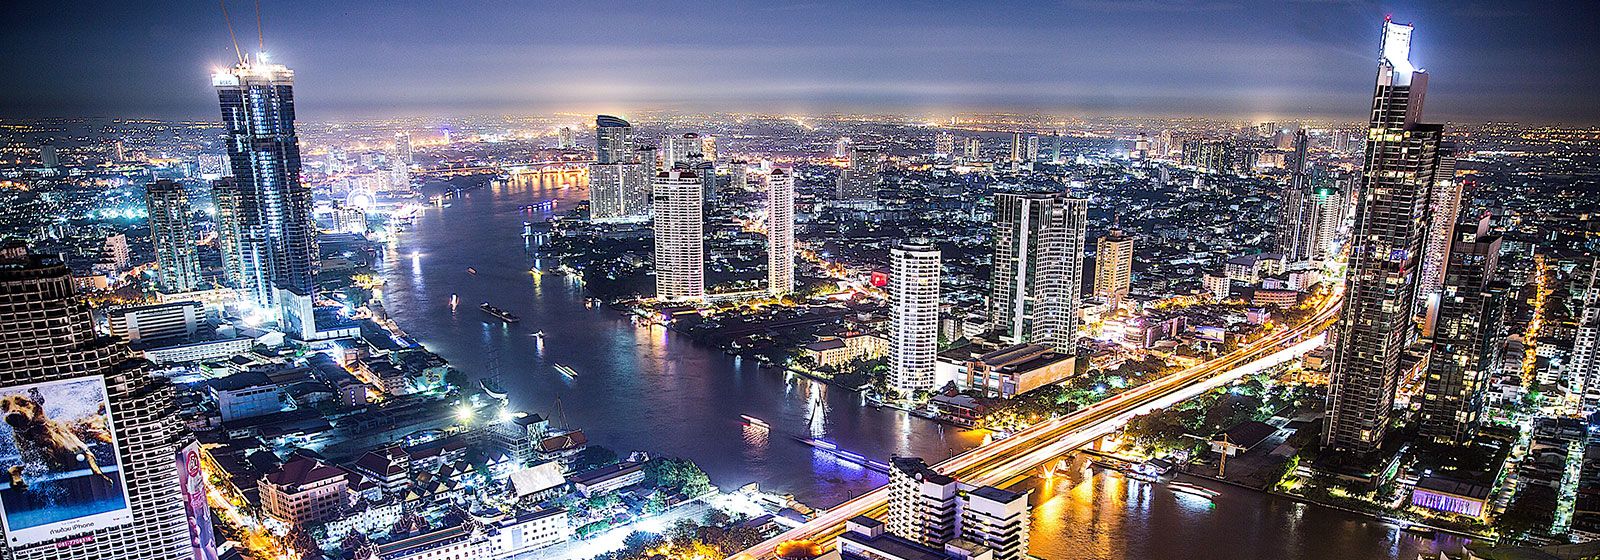 Arial view of the bustling city night life of Thailand